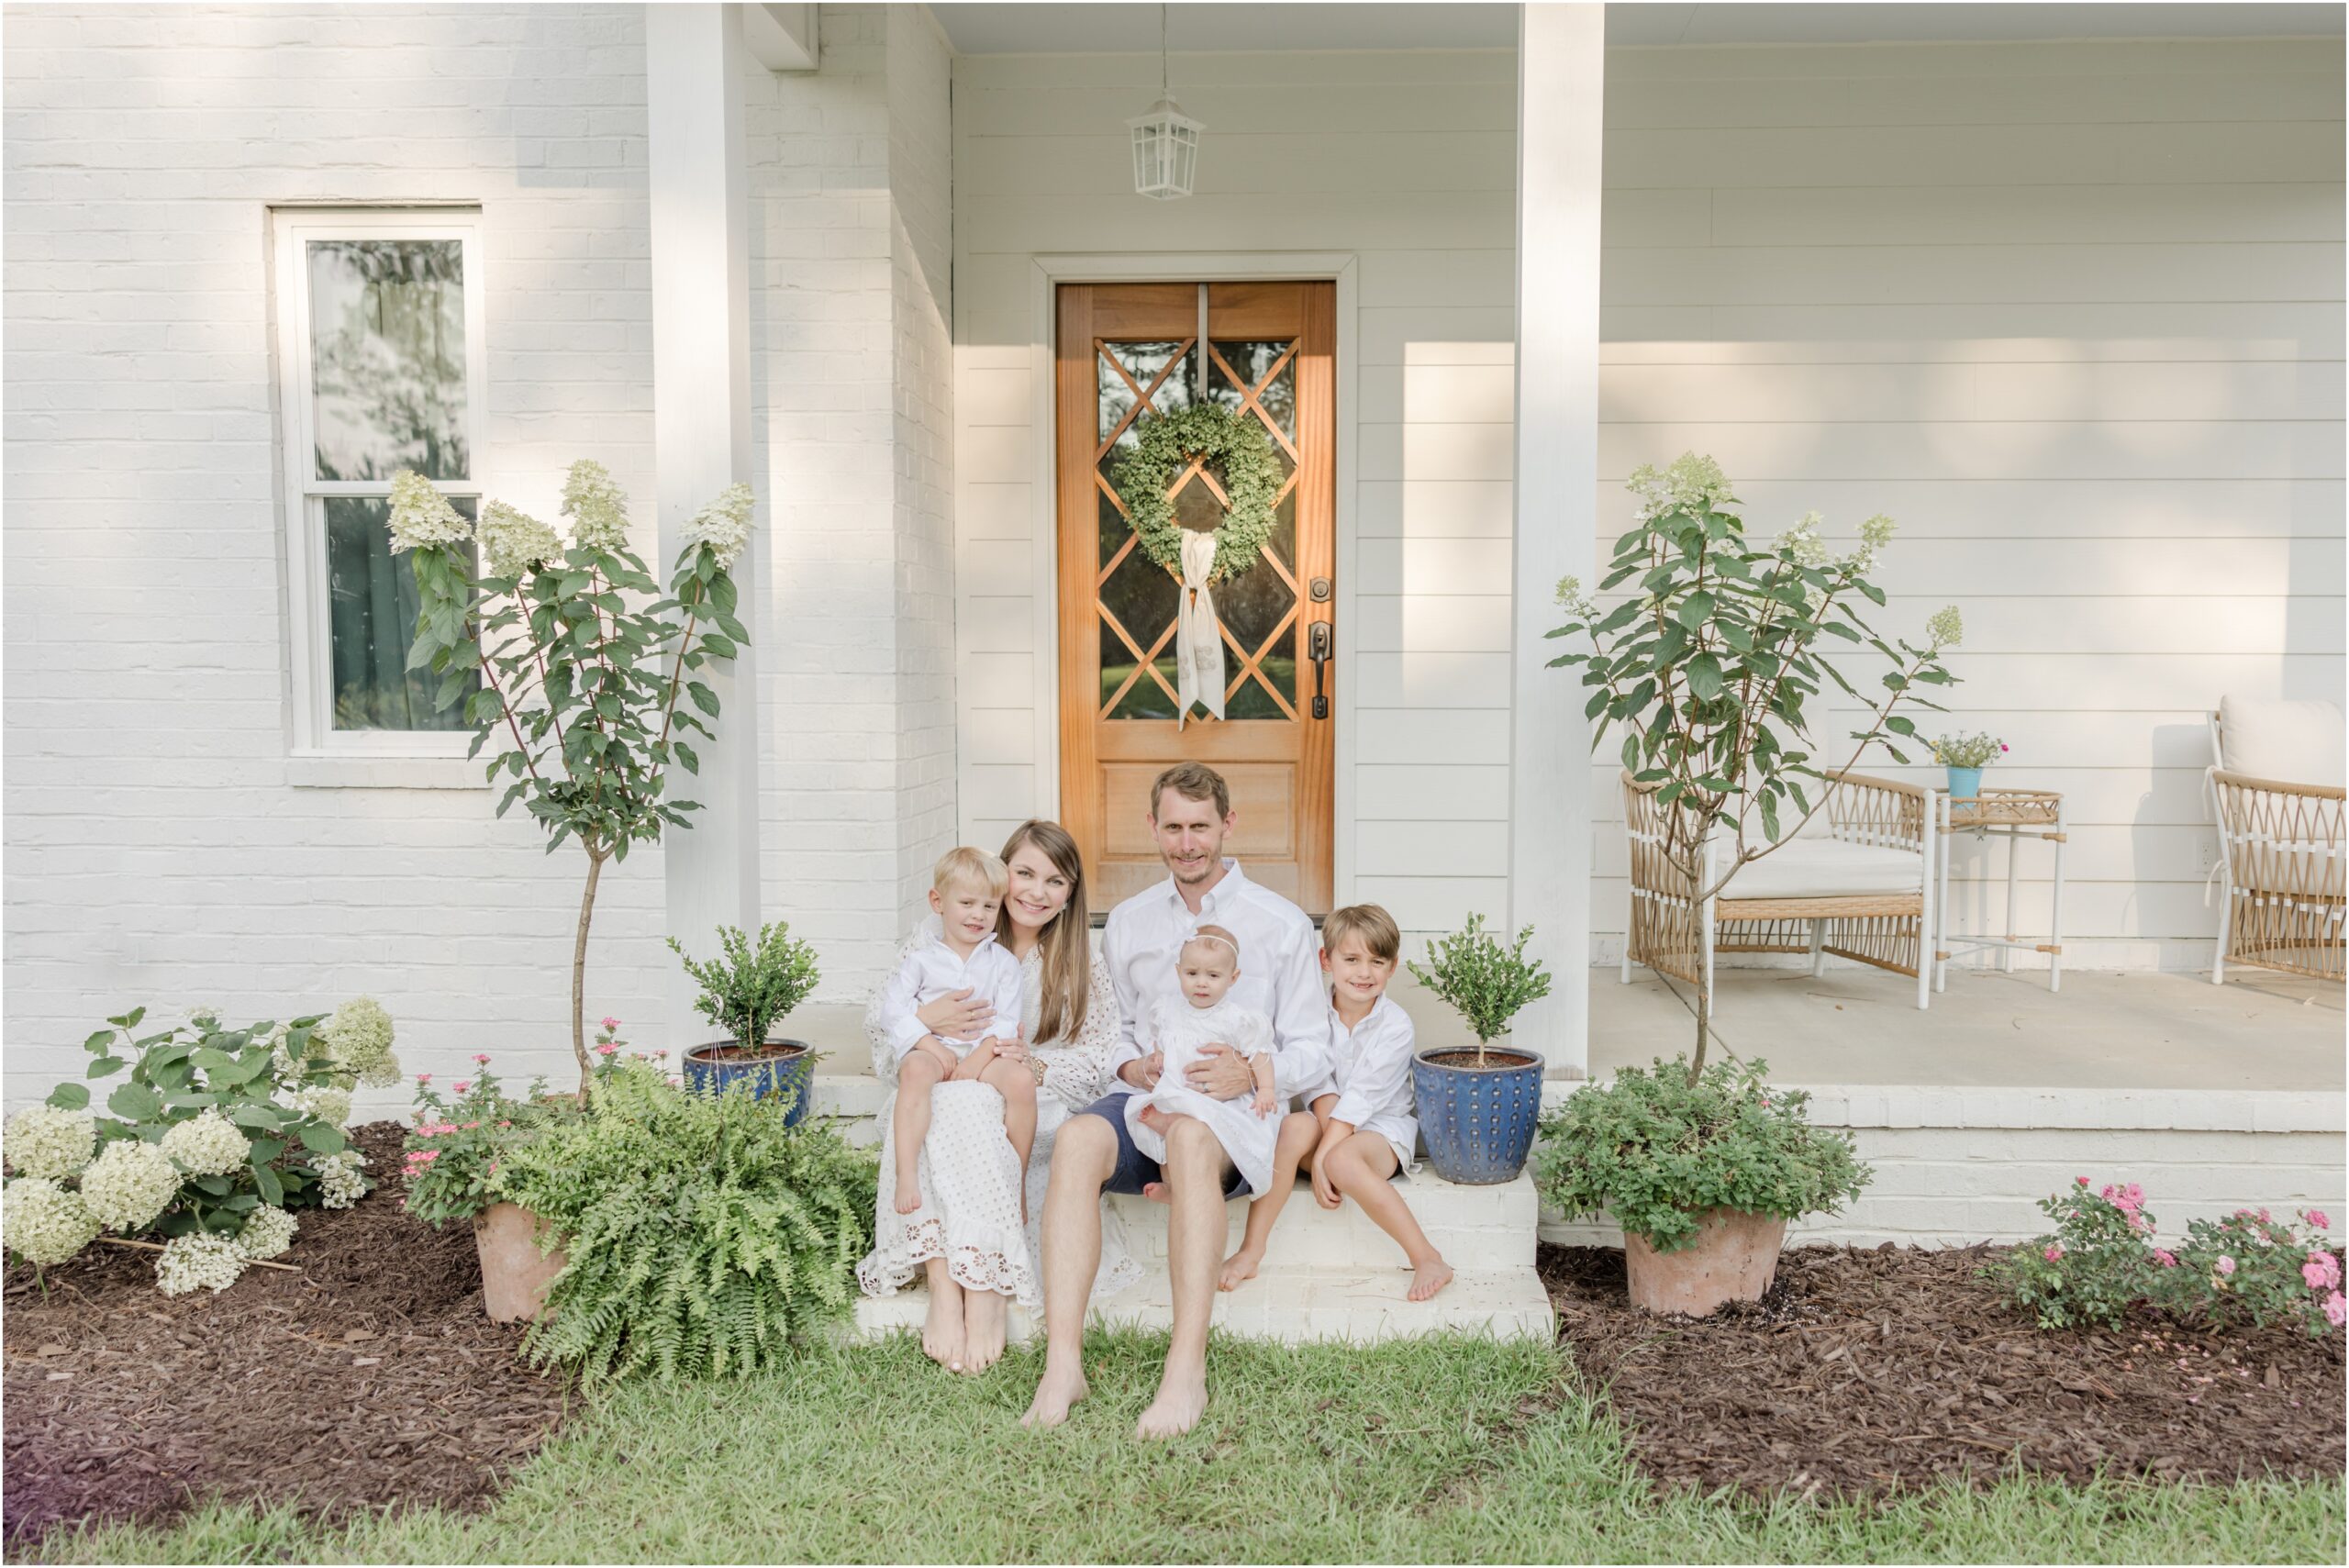 Greenville Family Portraits taken on front porch of white cottage